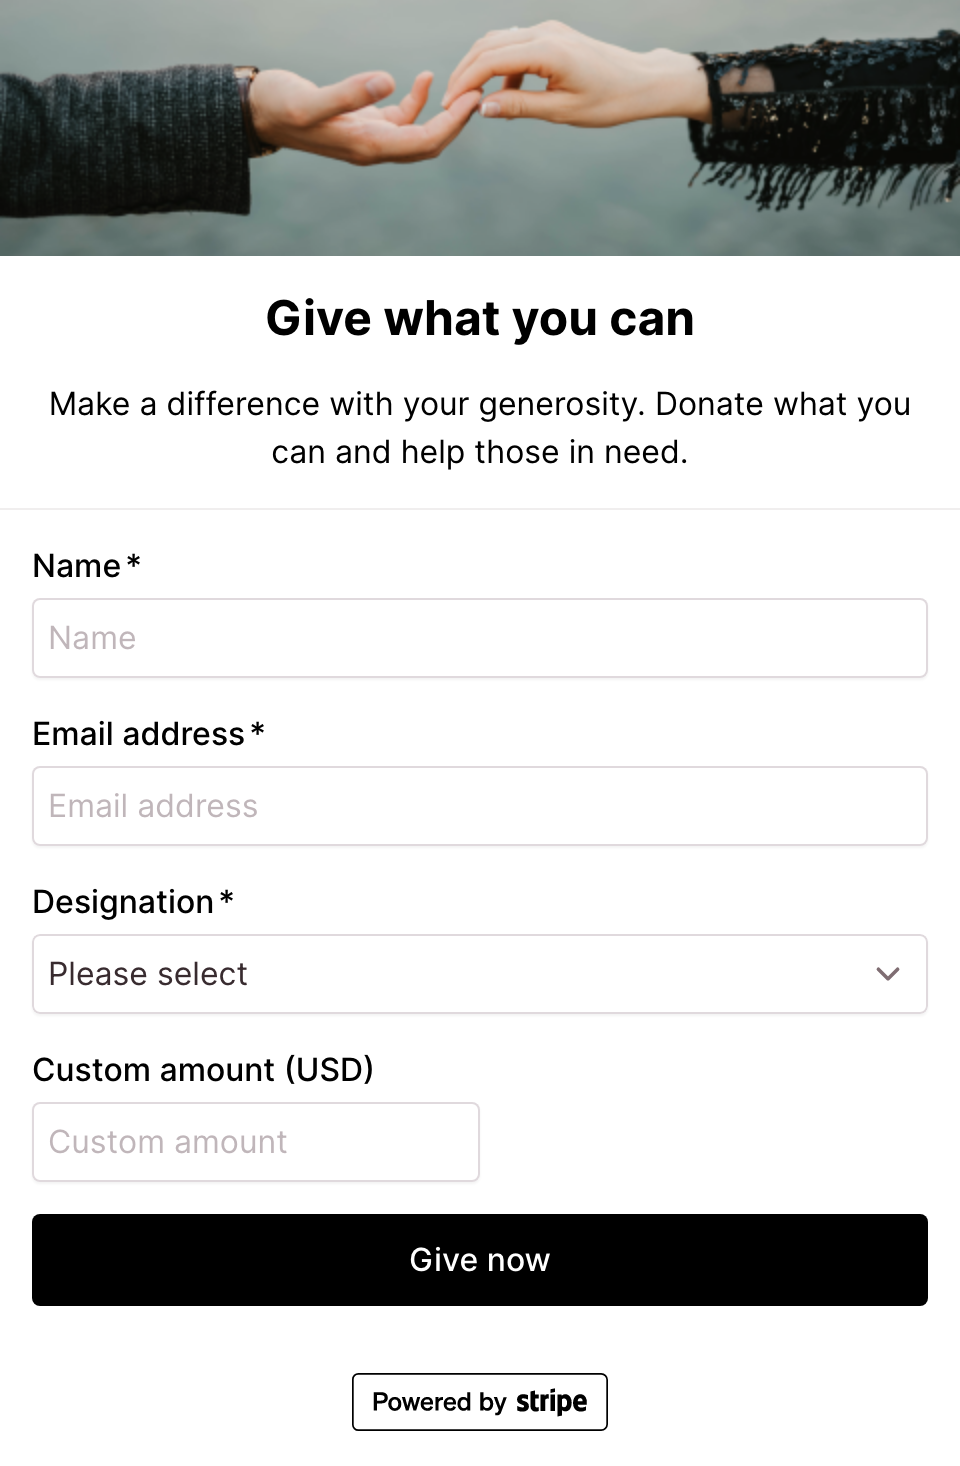 Give what you can (pay what you want) donation form - Stripe donation